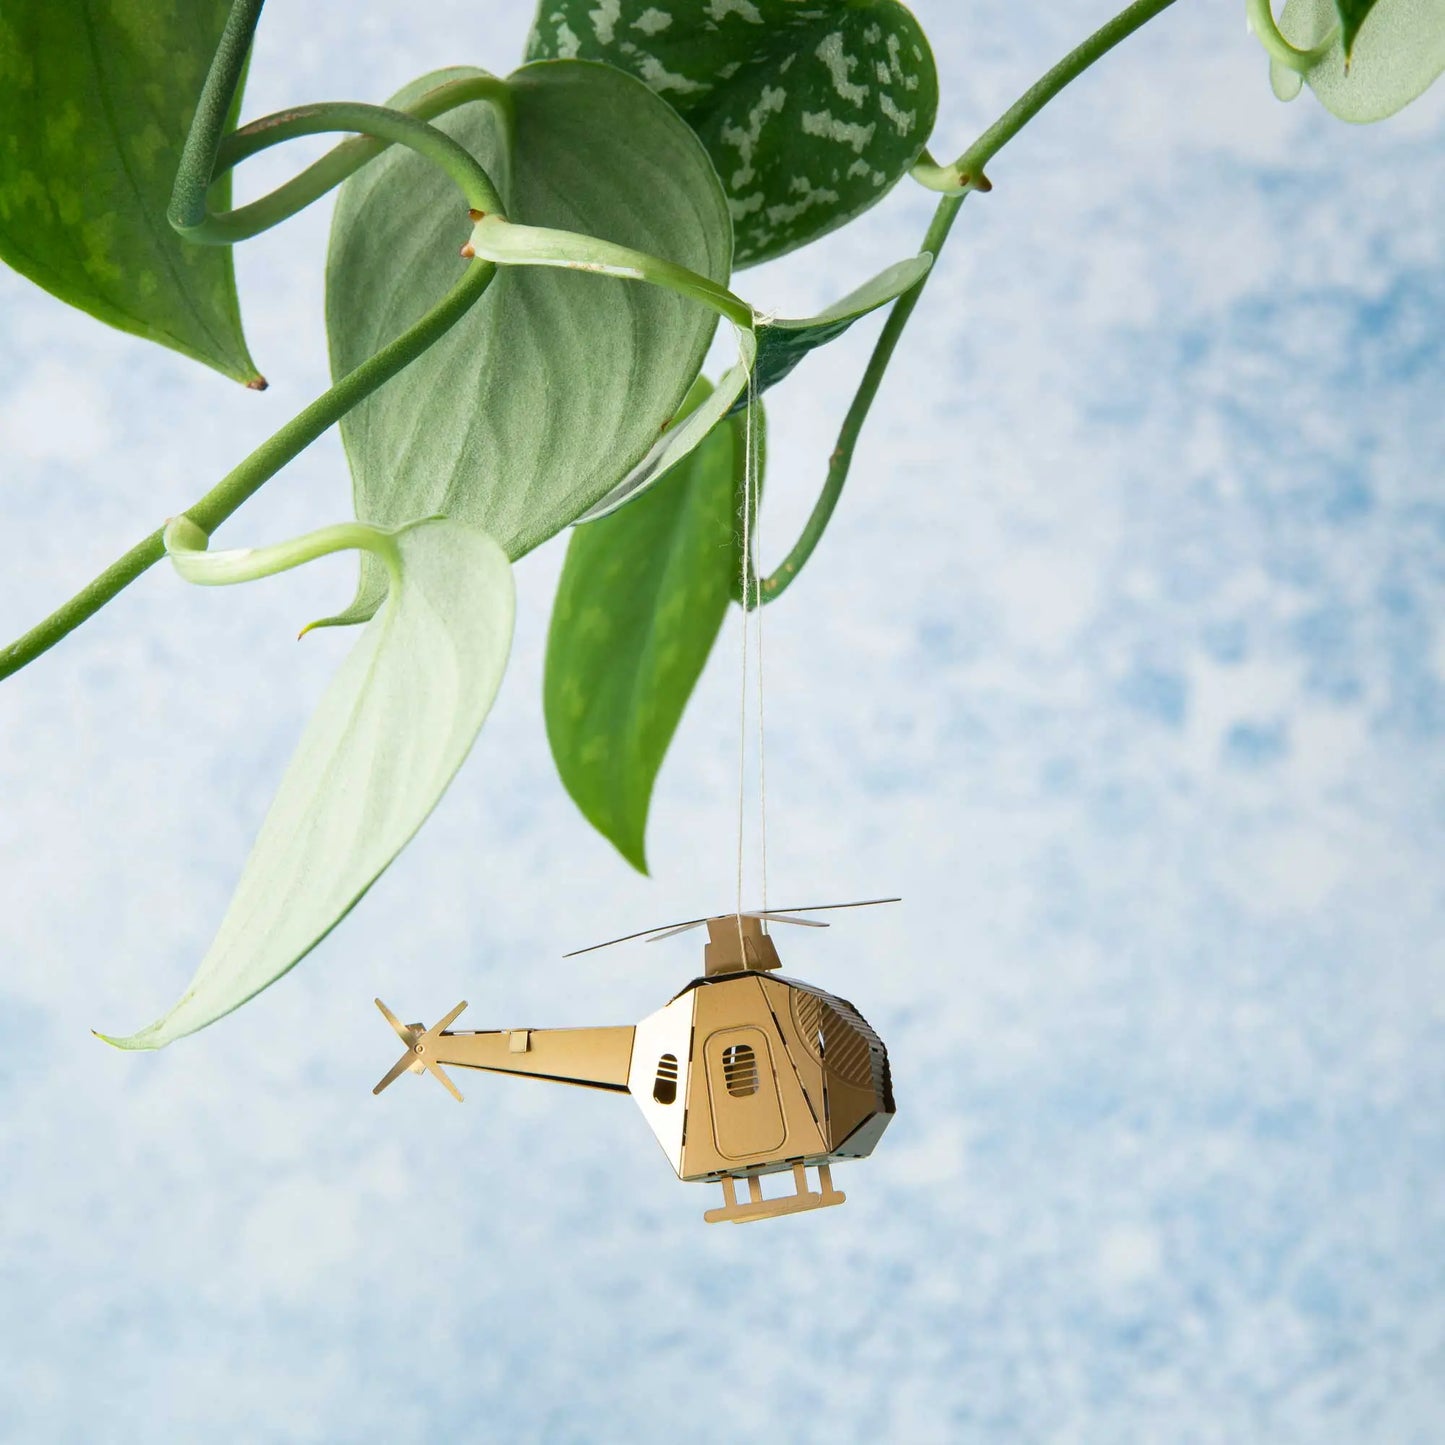 Mini Model Helicopter - House plant decoration